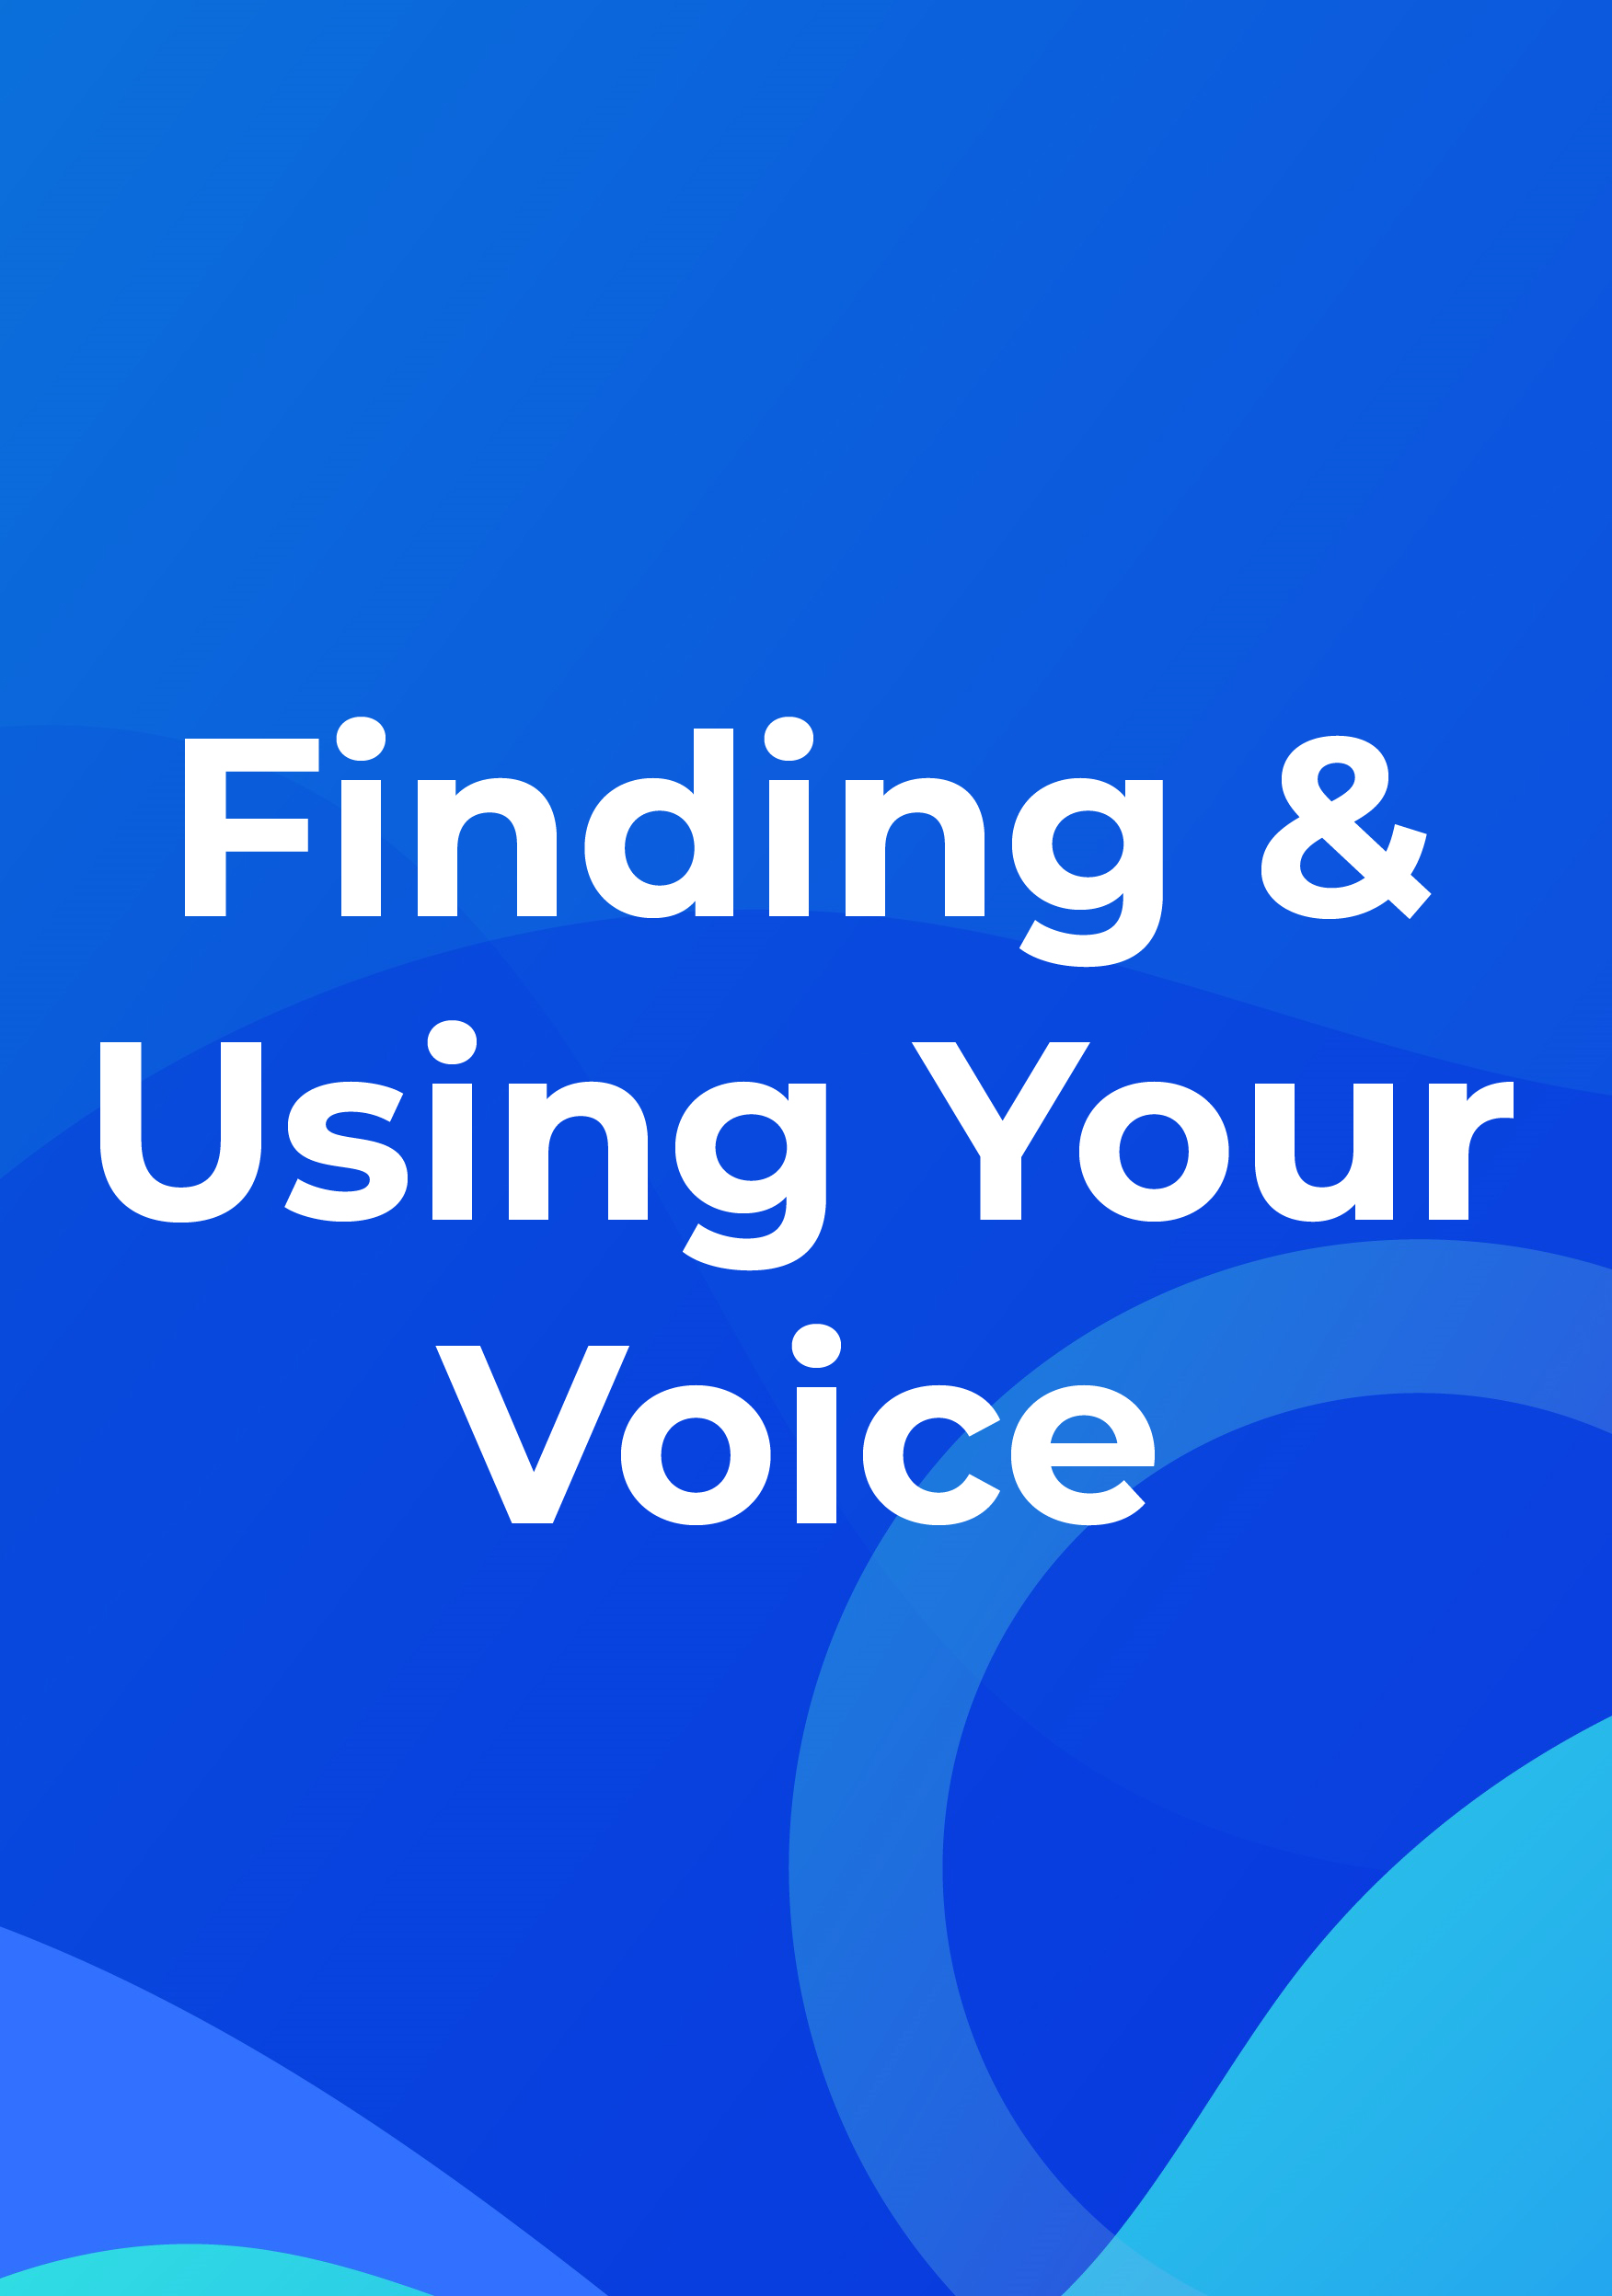 Finding & Using Your Voice - IMPACT Safety